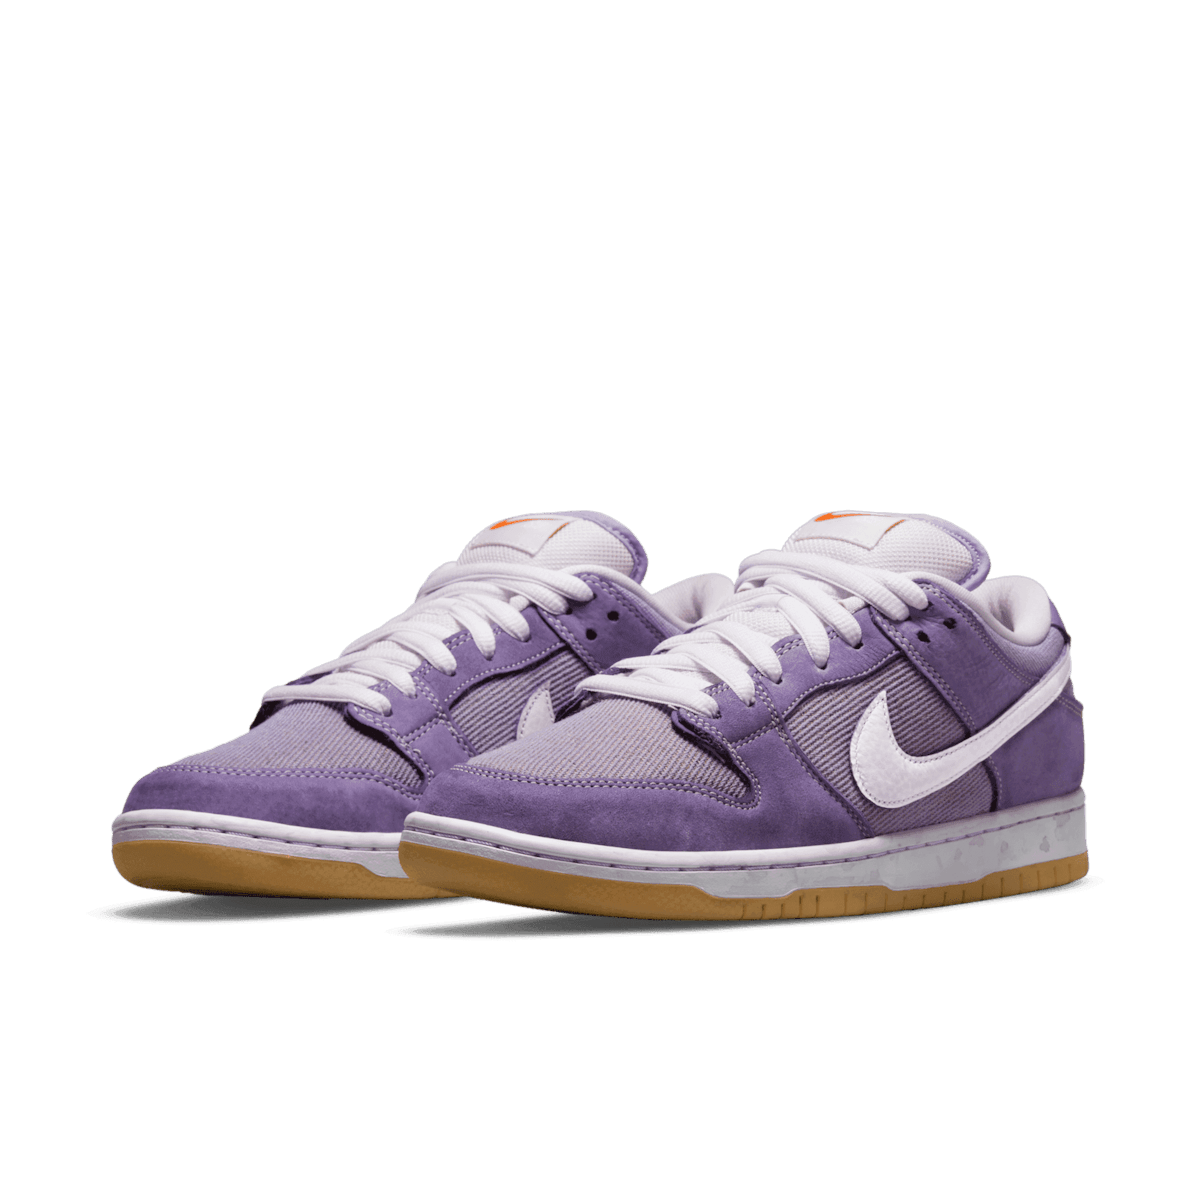 Nike SB Dunk Low Orange Label Unbleached Pack Lilac Angle 2